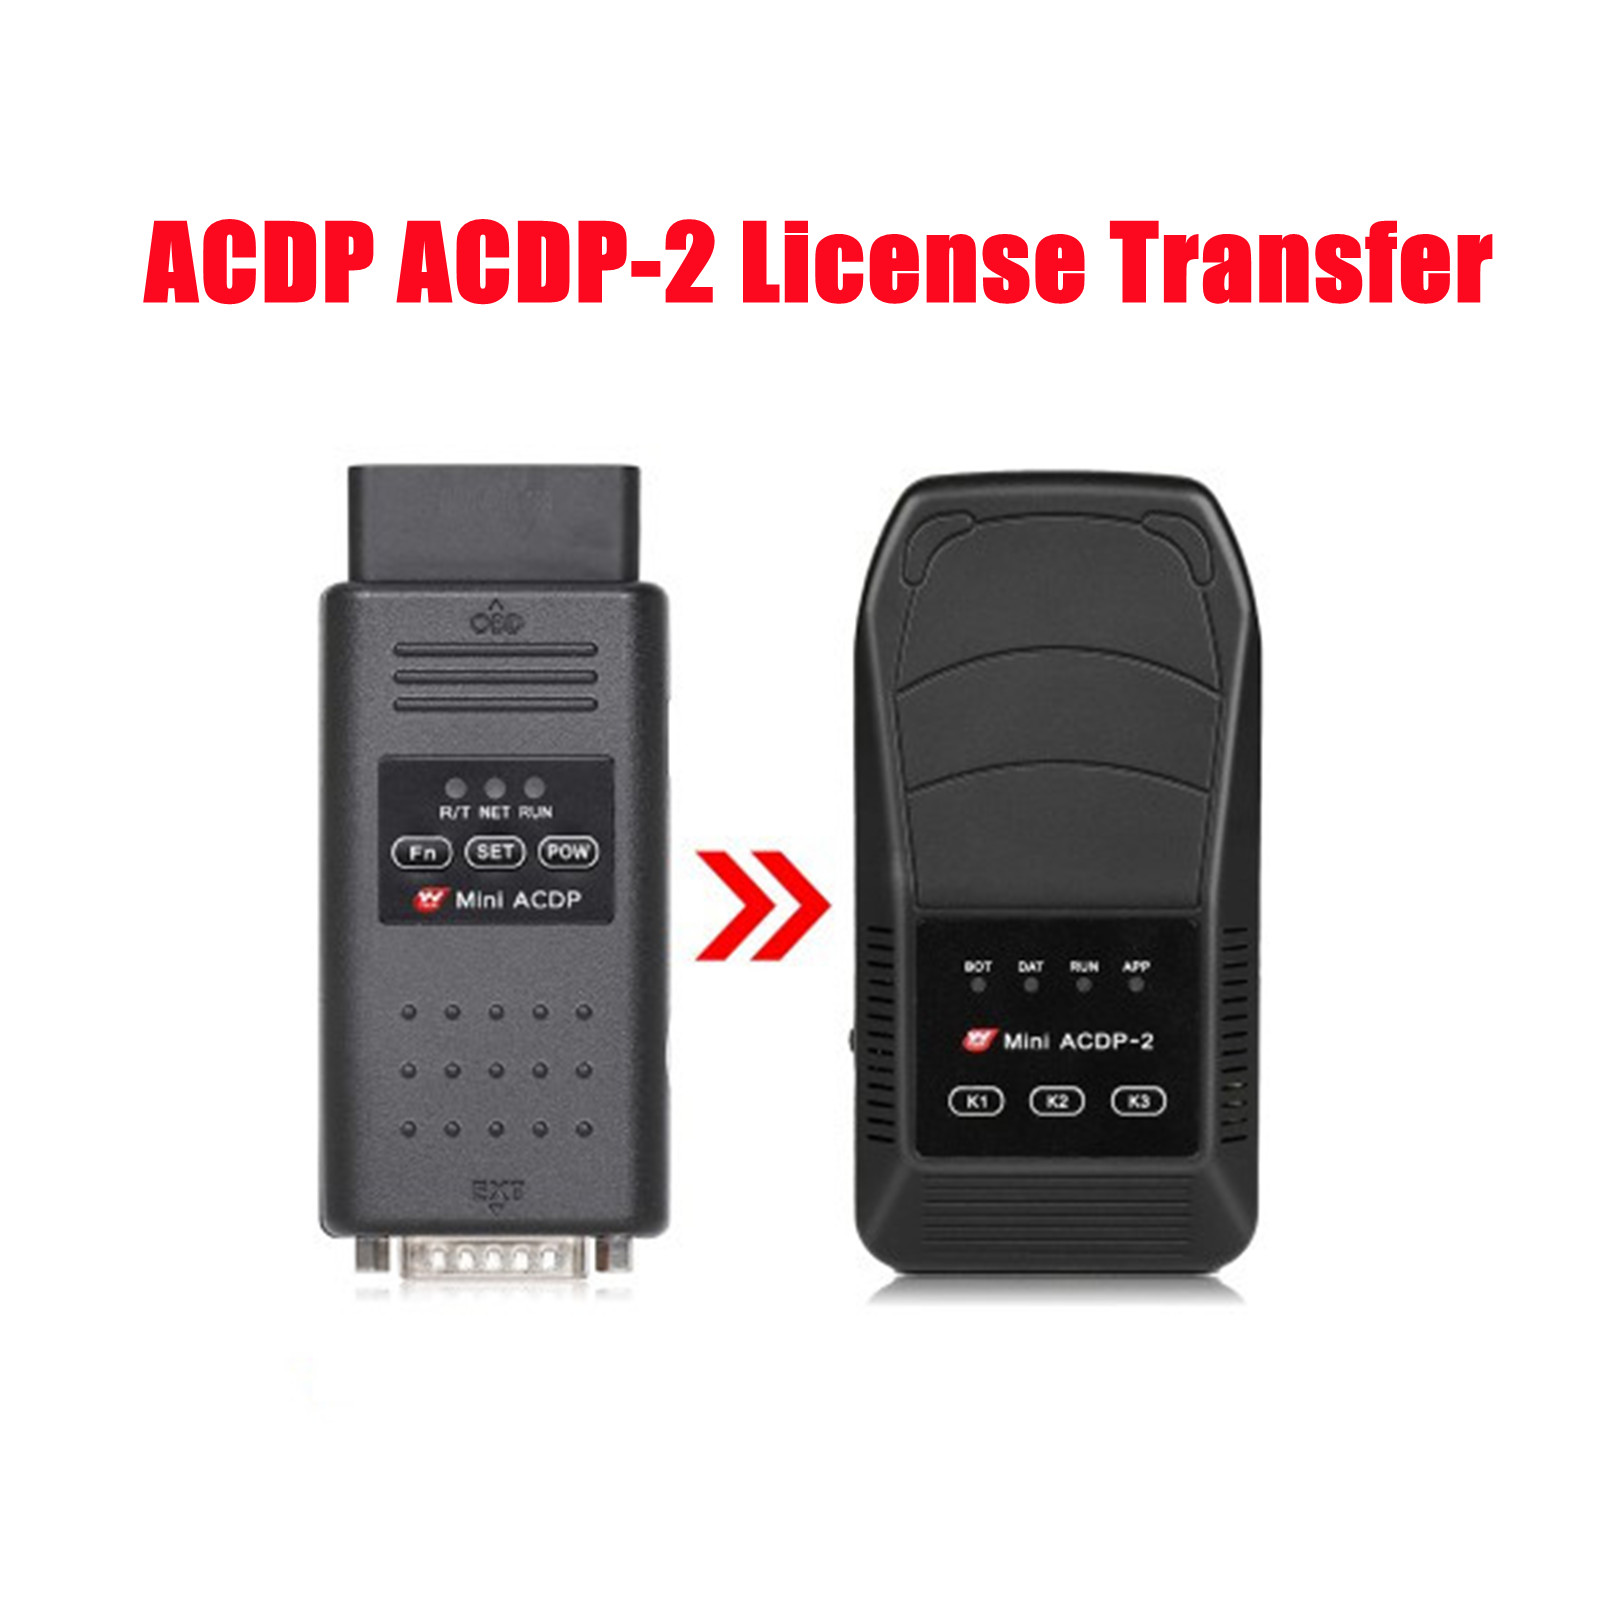 Yanhua Mini ACDP ACDP-2 License Transfer Plan Transfer All License from ACDP-1 to ACDP-2